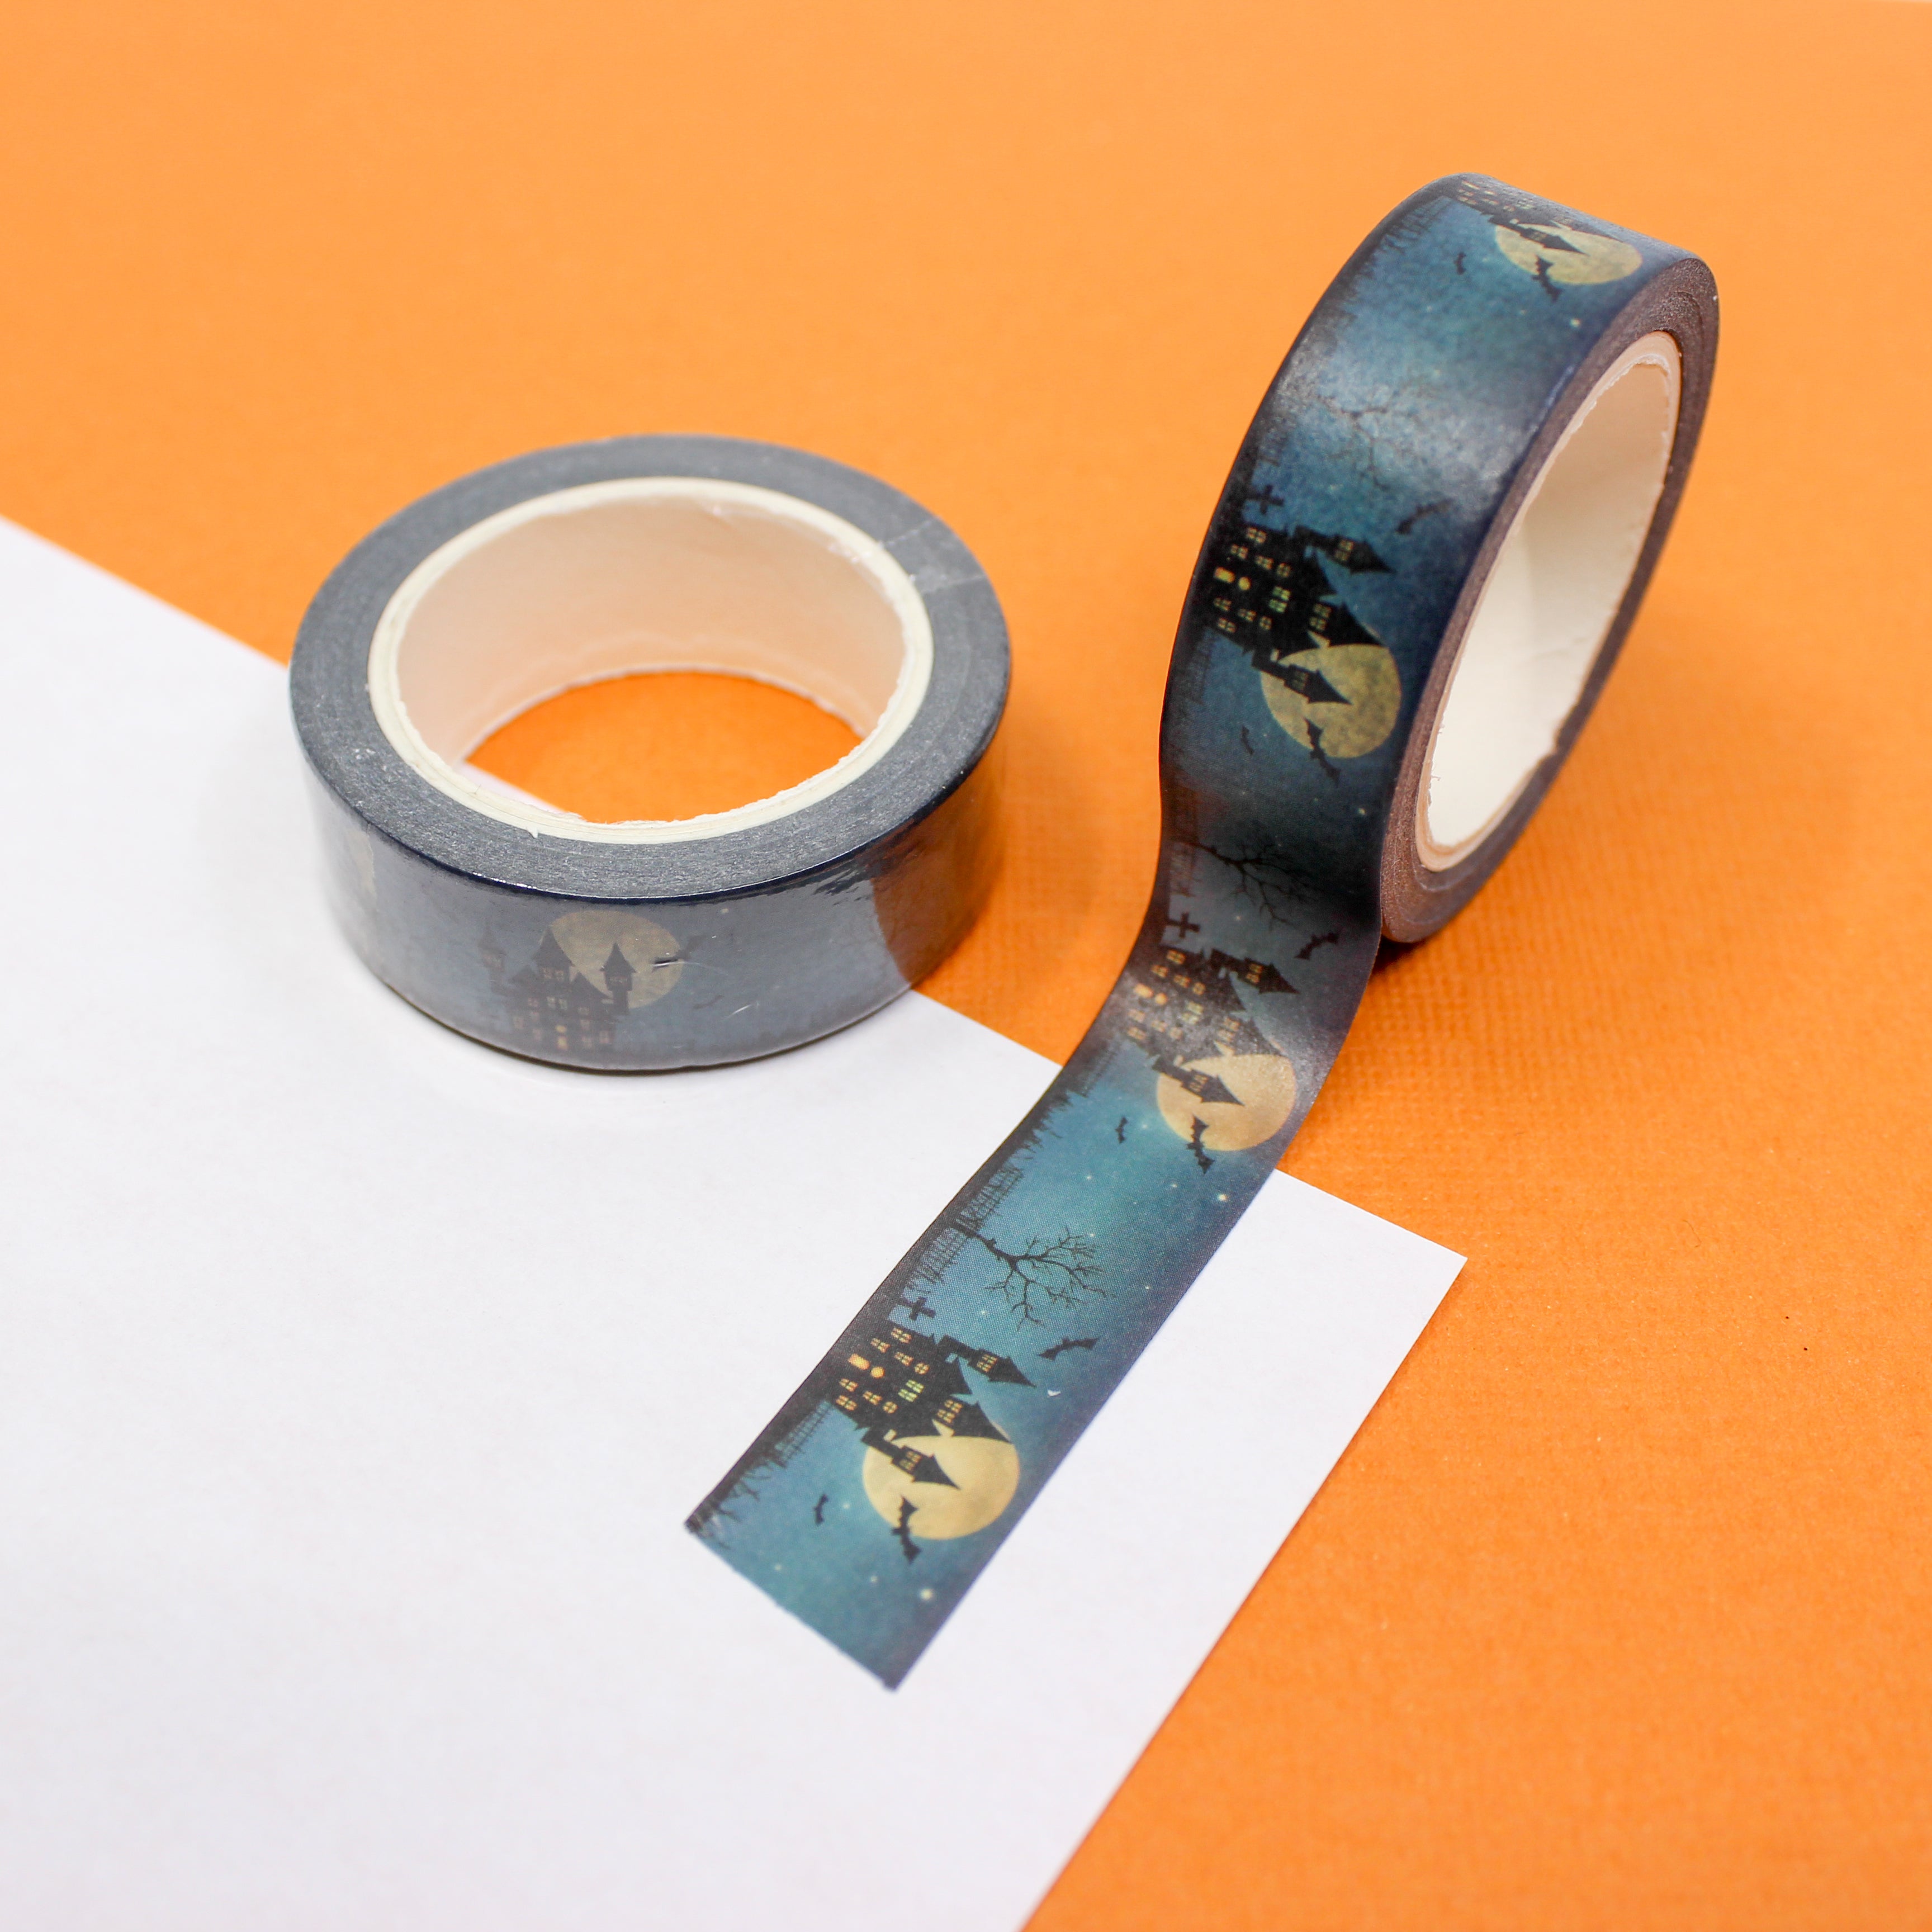 This is a spooky haunted house with full moon themed washi tape from BBB Supplies Craft Shop